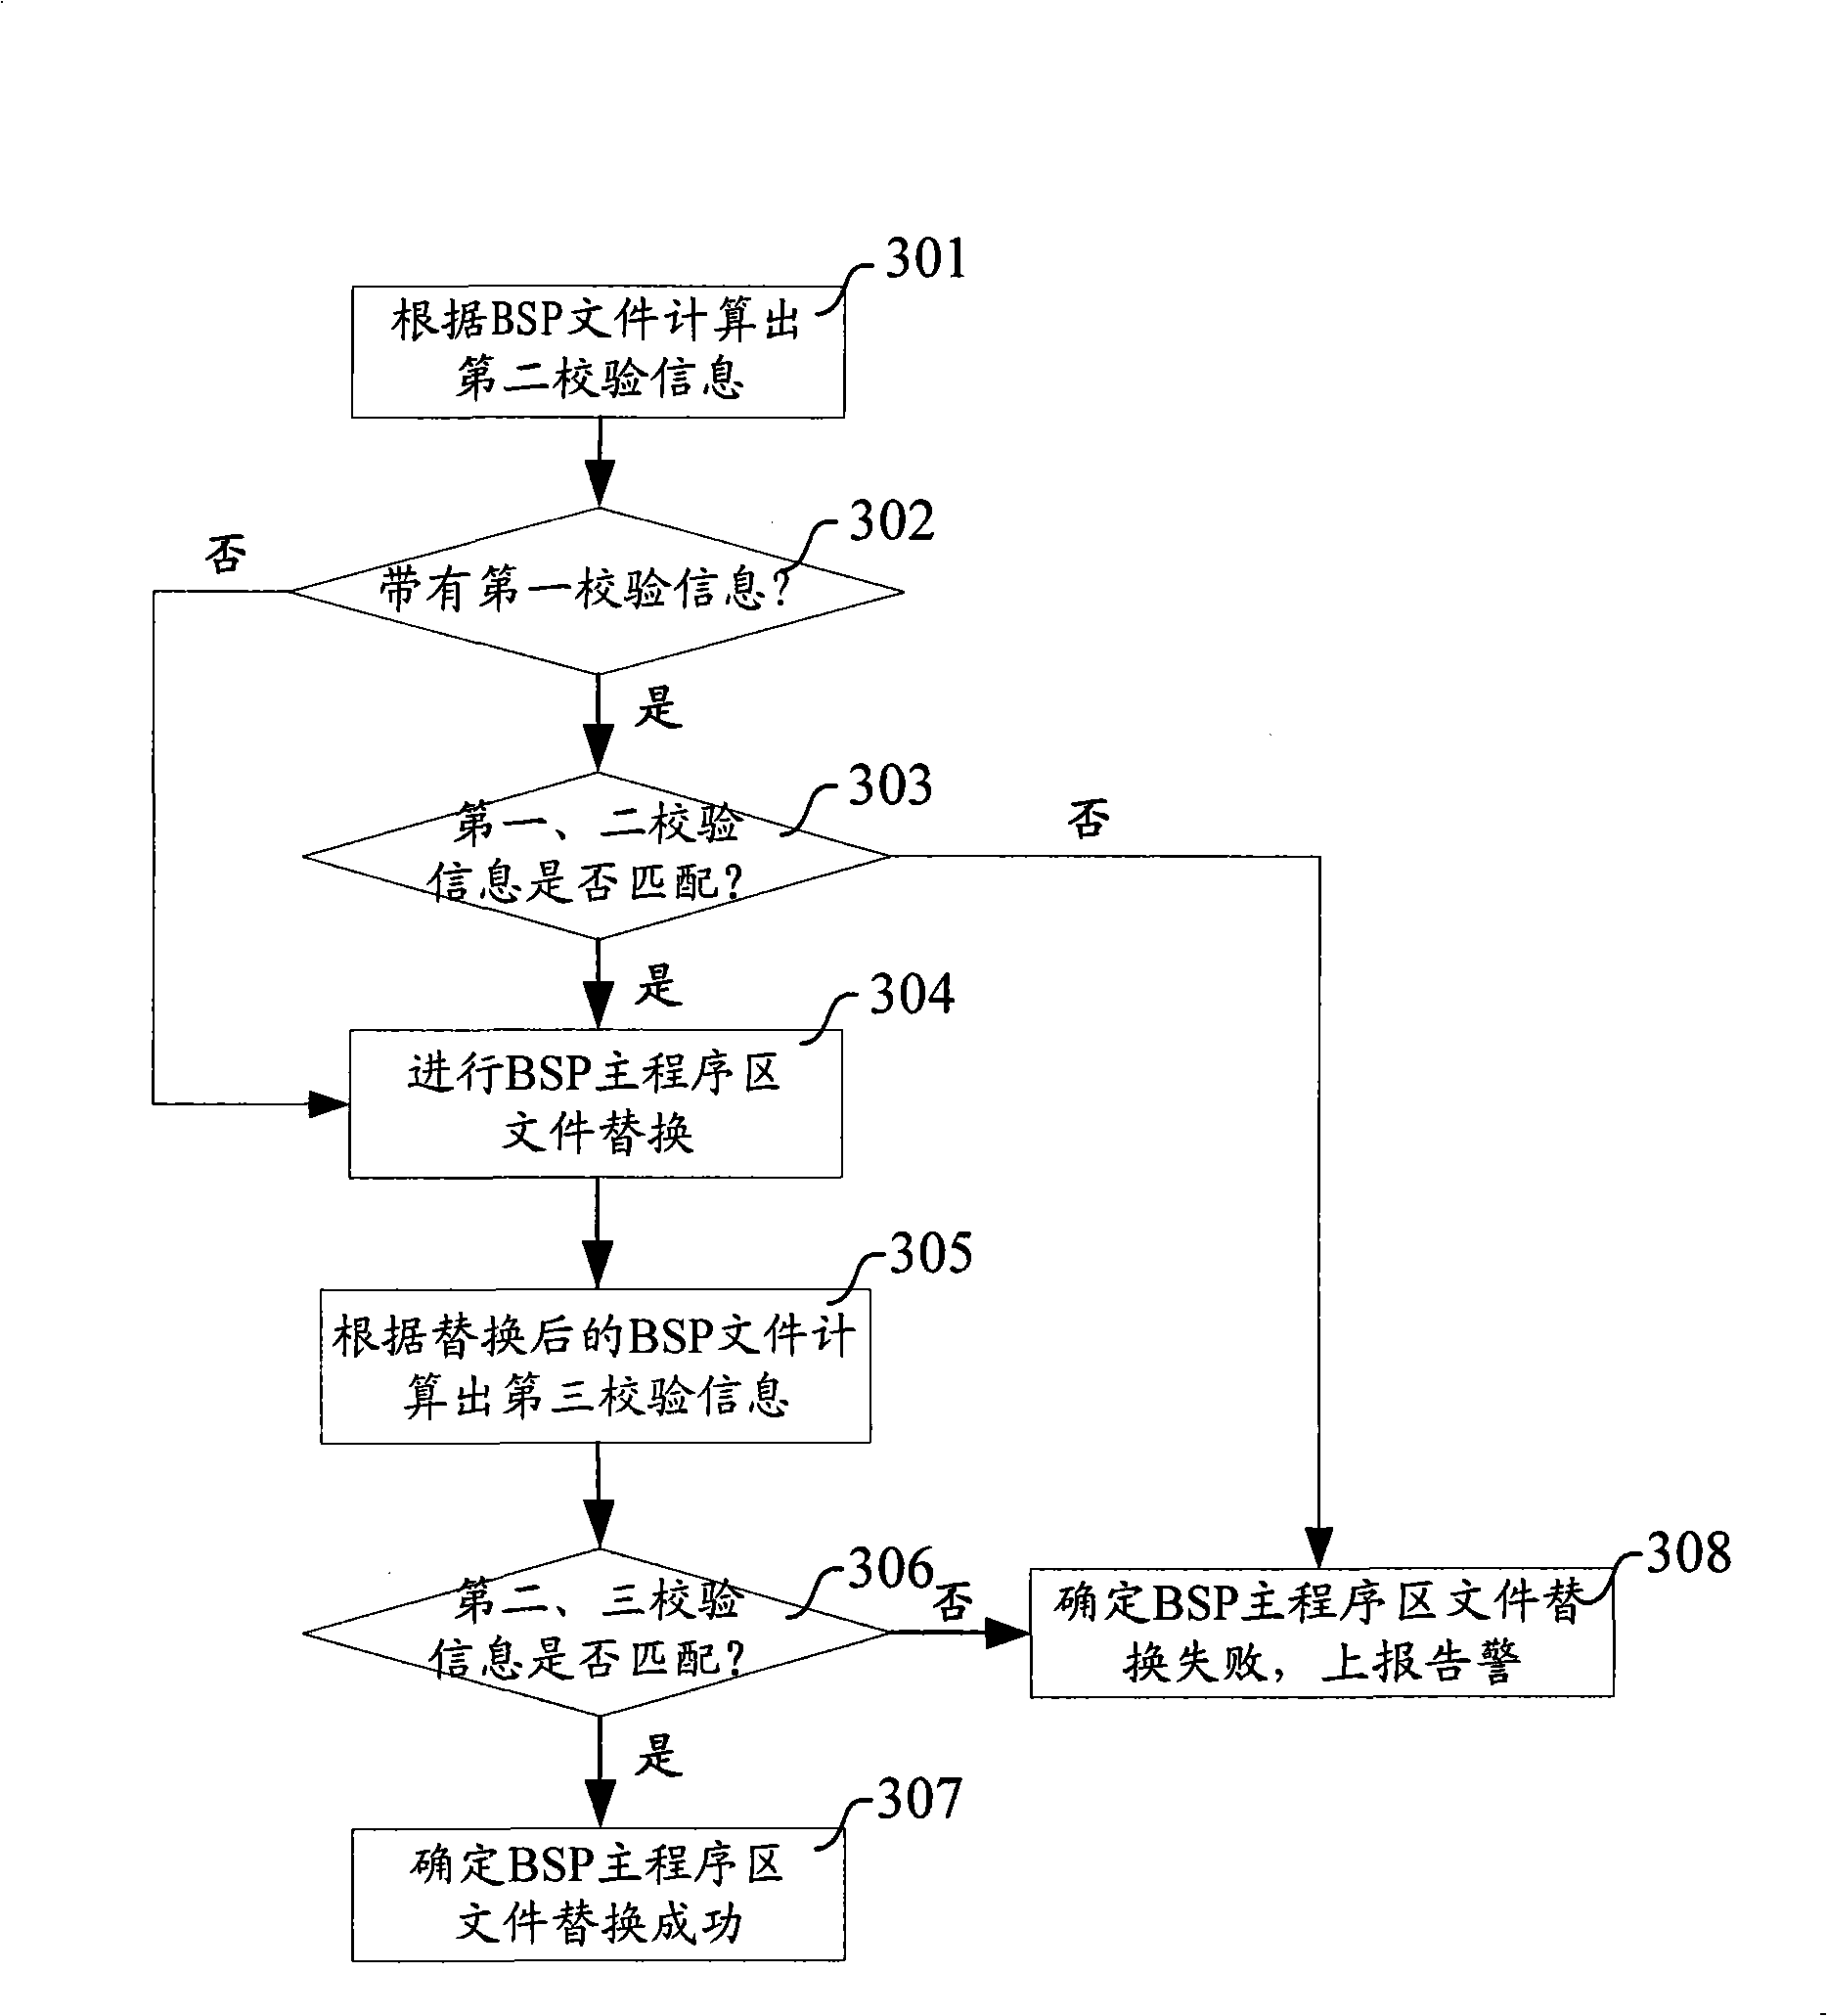 Method and apparatus for automatically detecting and recovering start-up of embedded system